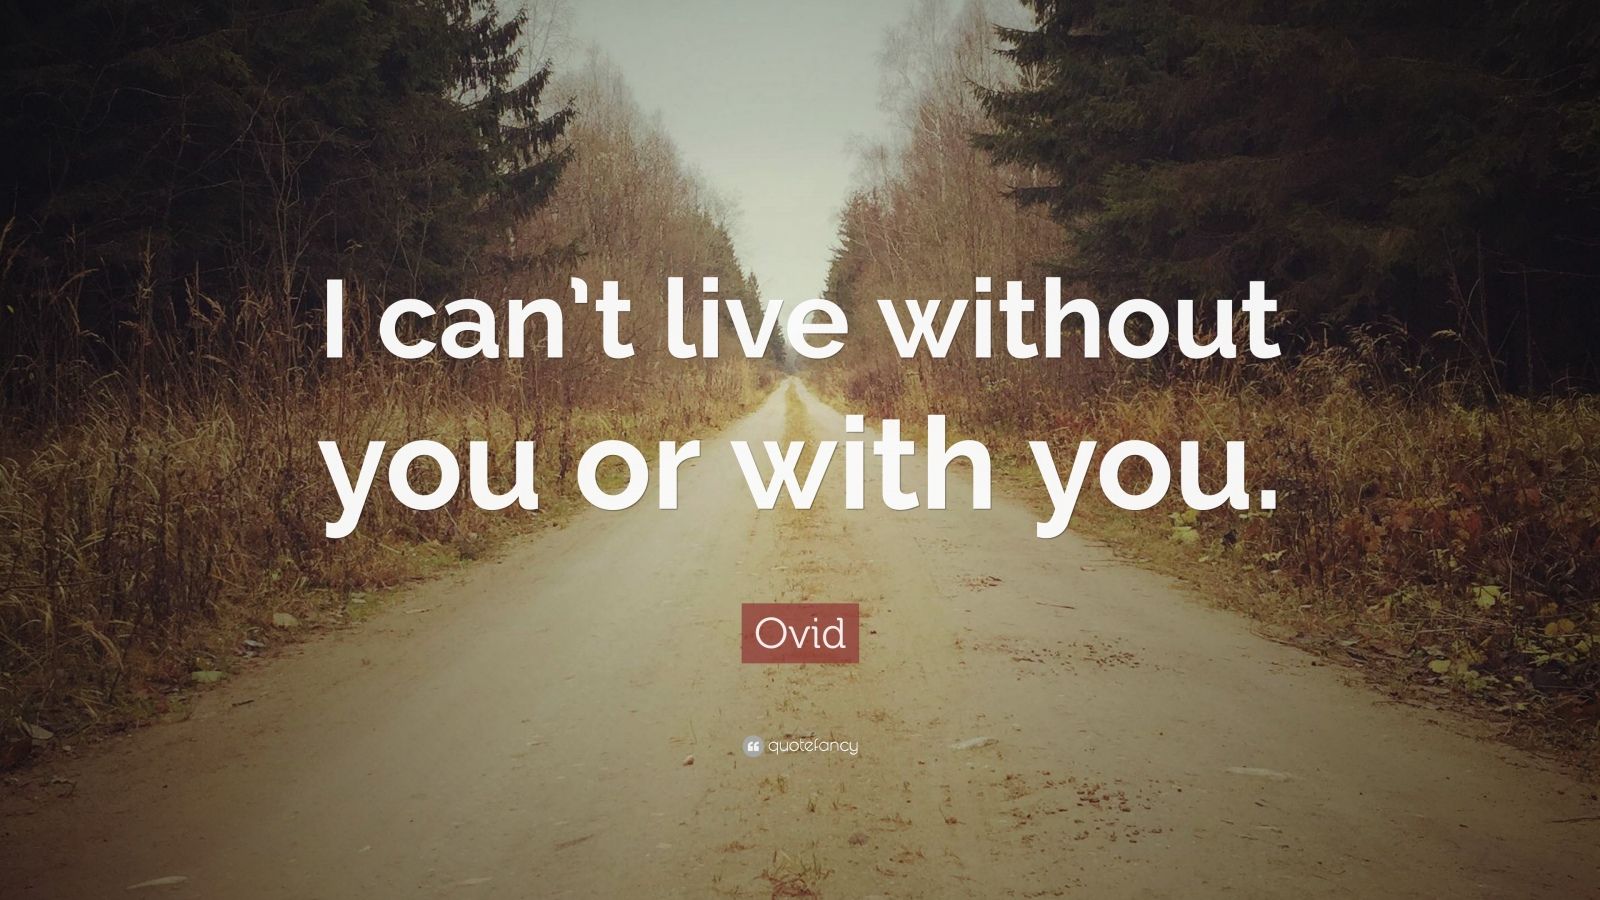 Ovid Quote: "I can't live without you or with you." (12 ...